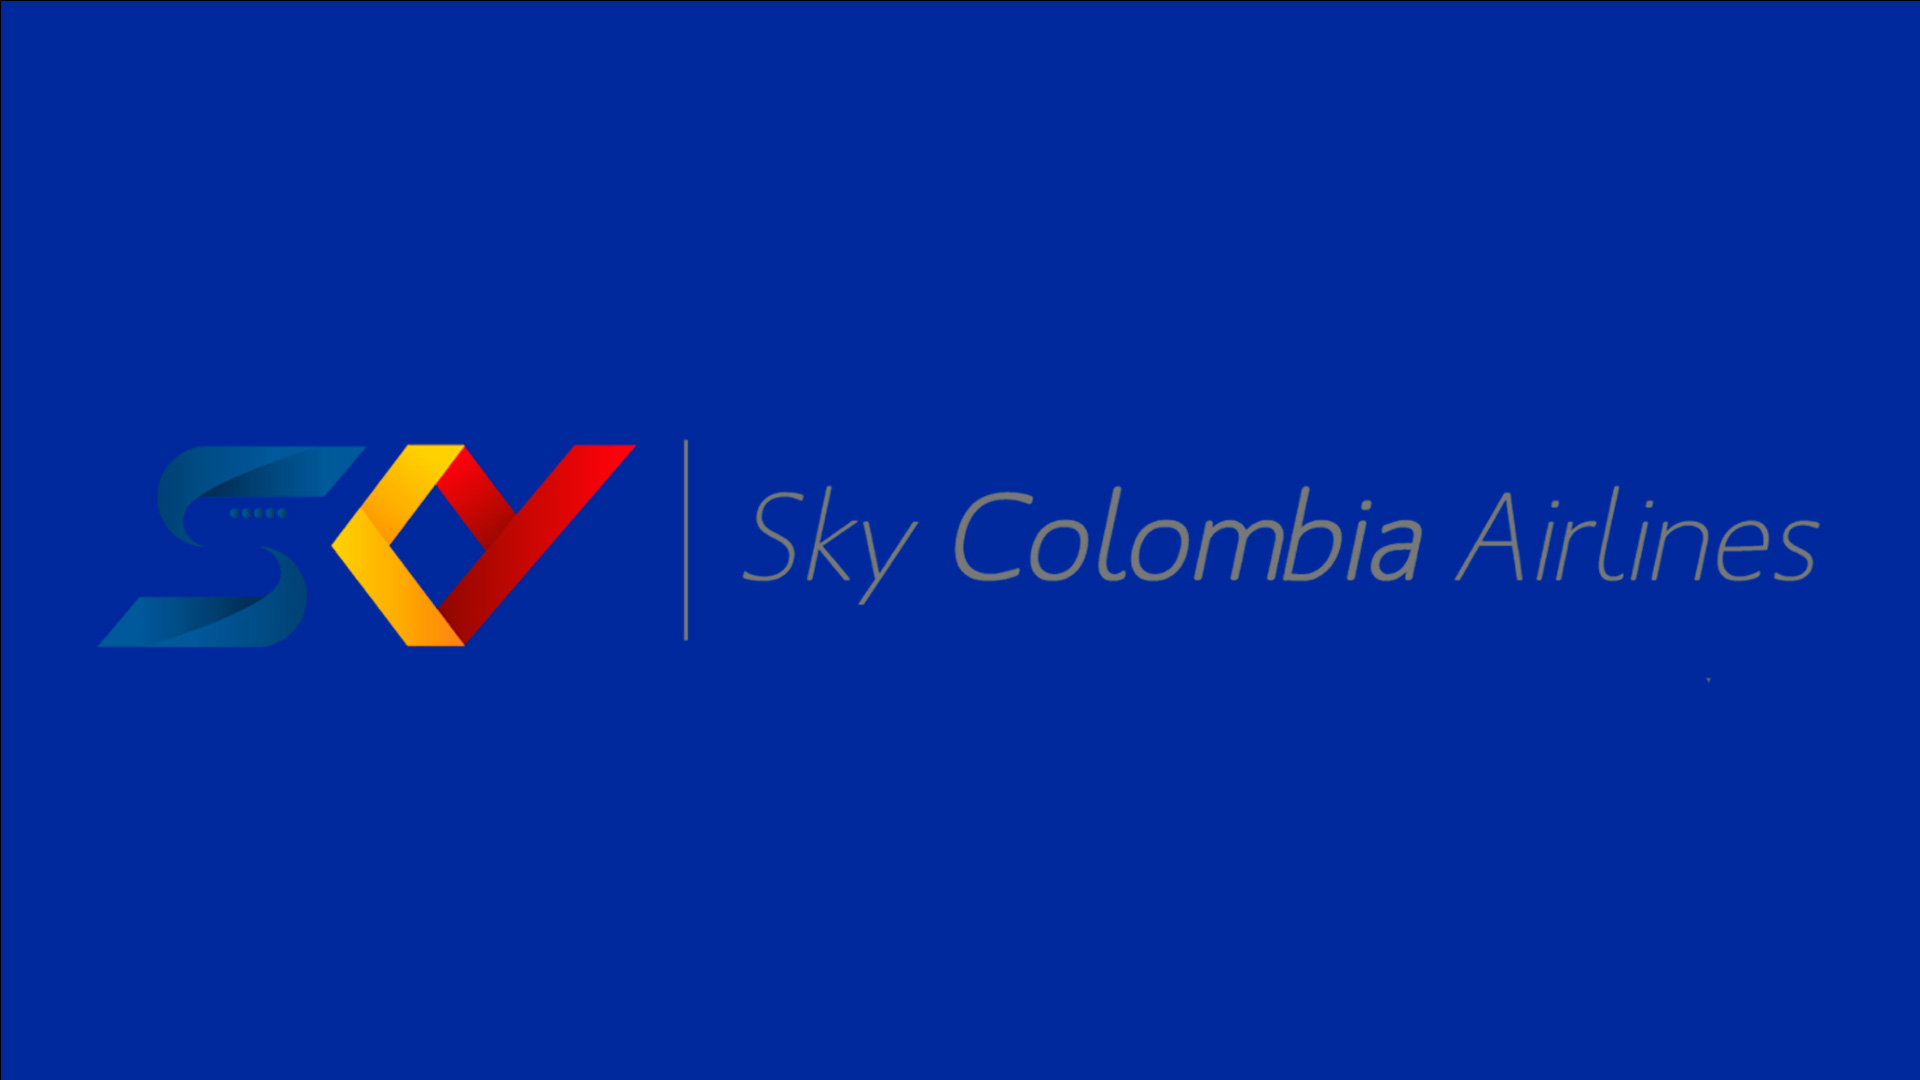 Sky Colombia